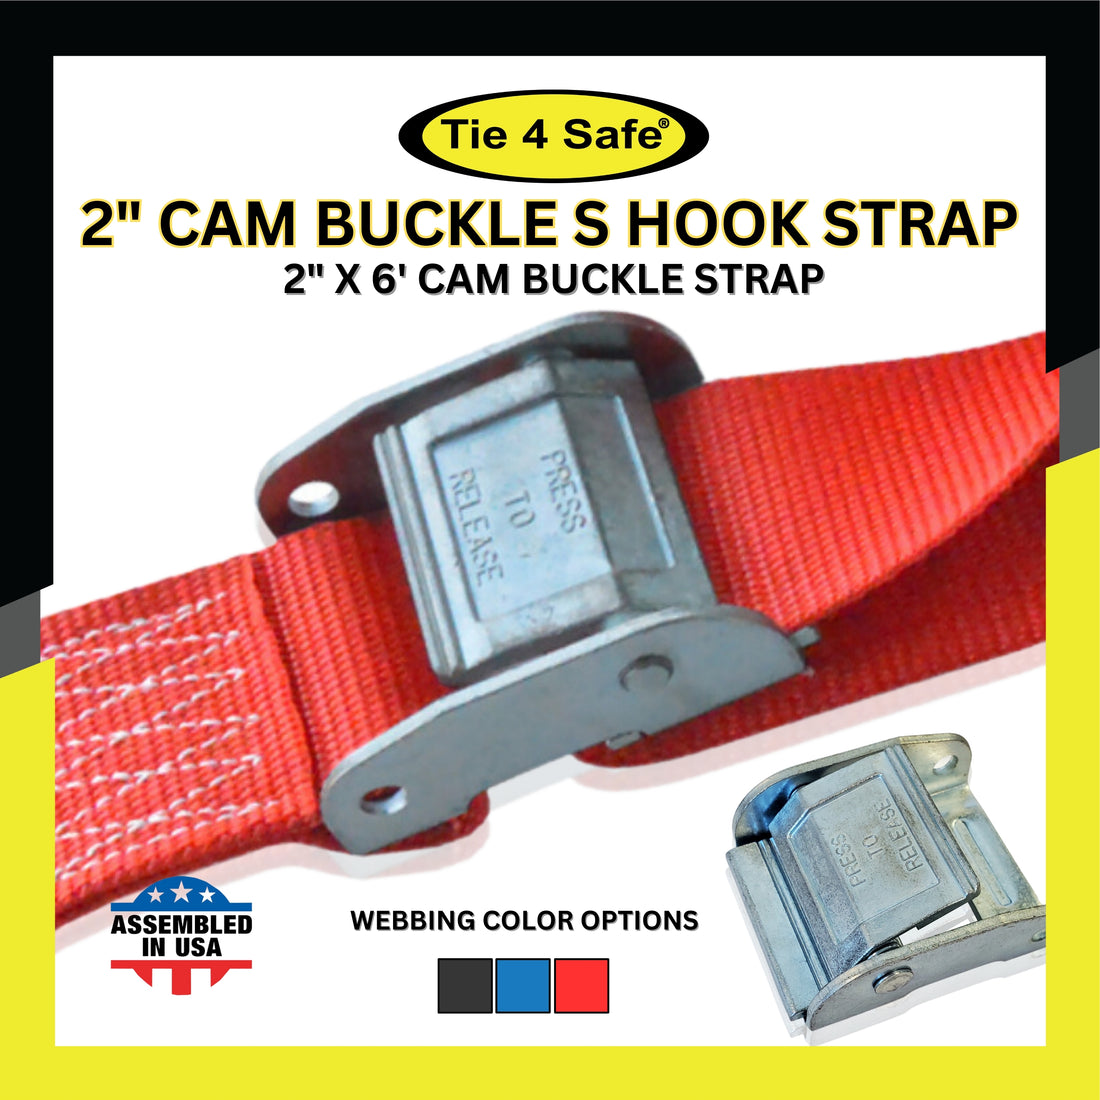 2" X 6' Cam Buckle Strap With S Fully Coated S Hooks